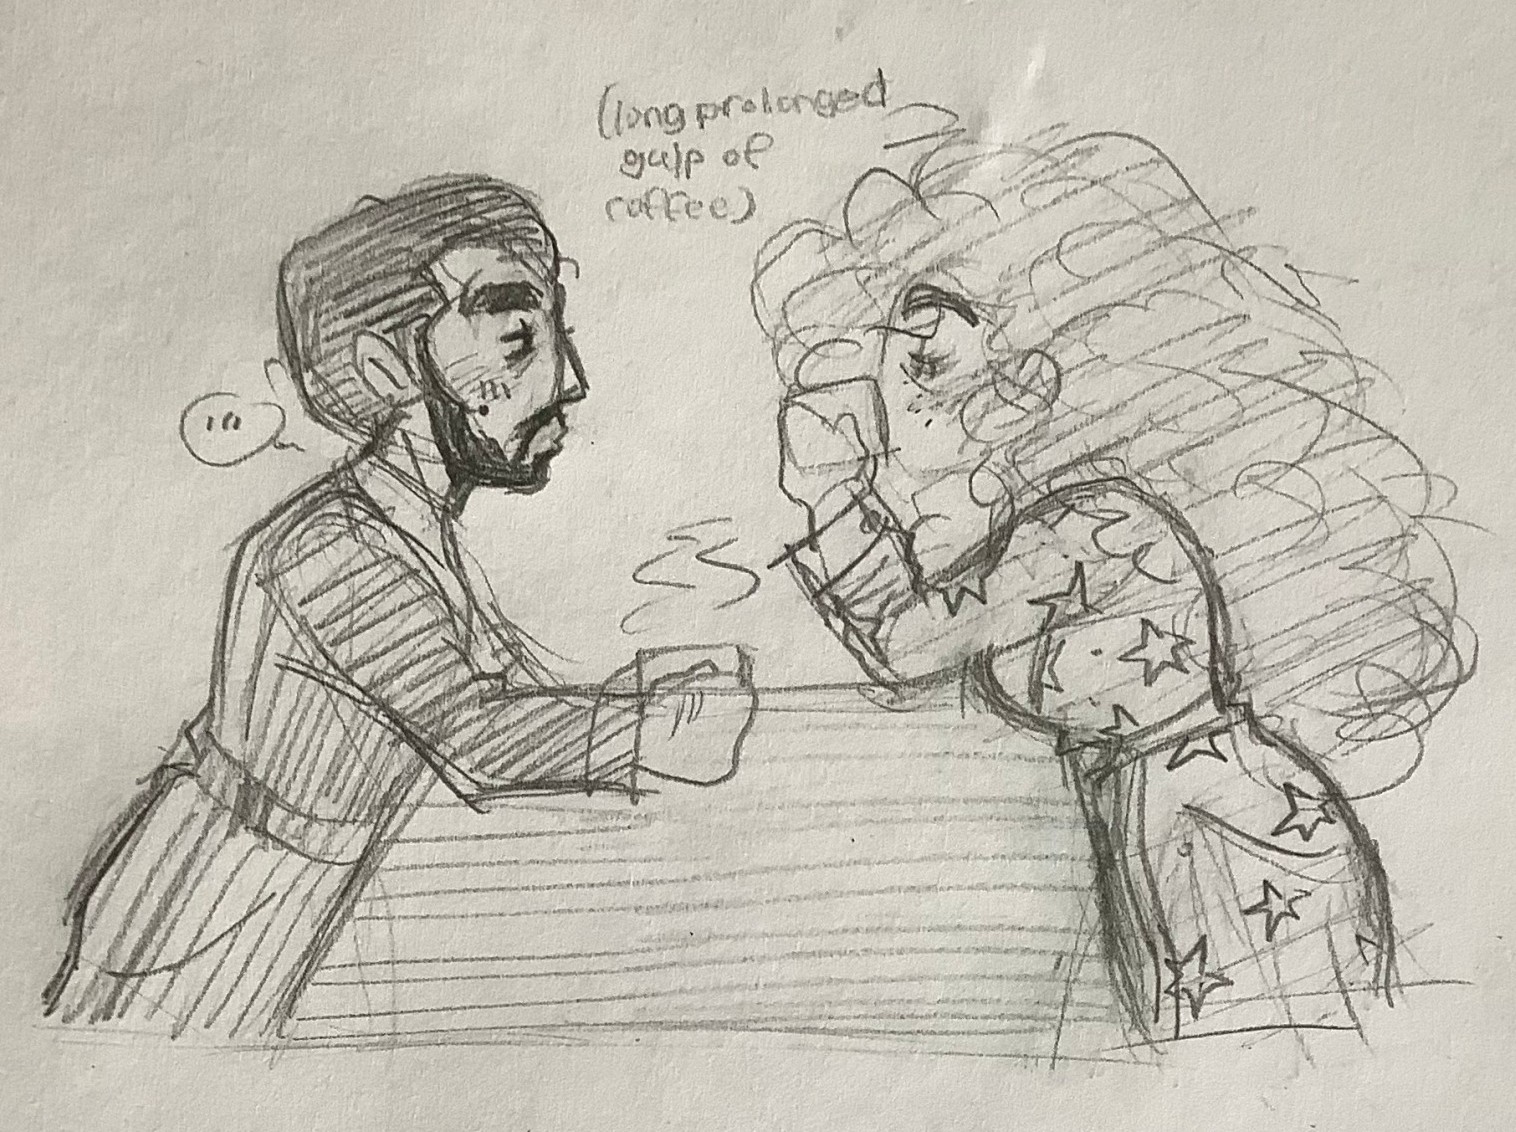 Martin GreyWhinder and Mari Faucher sip coffee together (2) (Harmony and Horror)